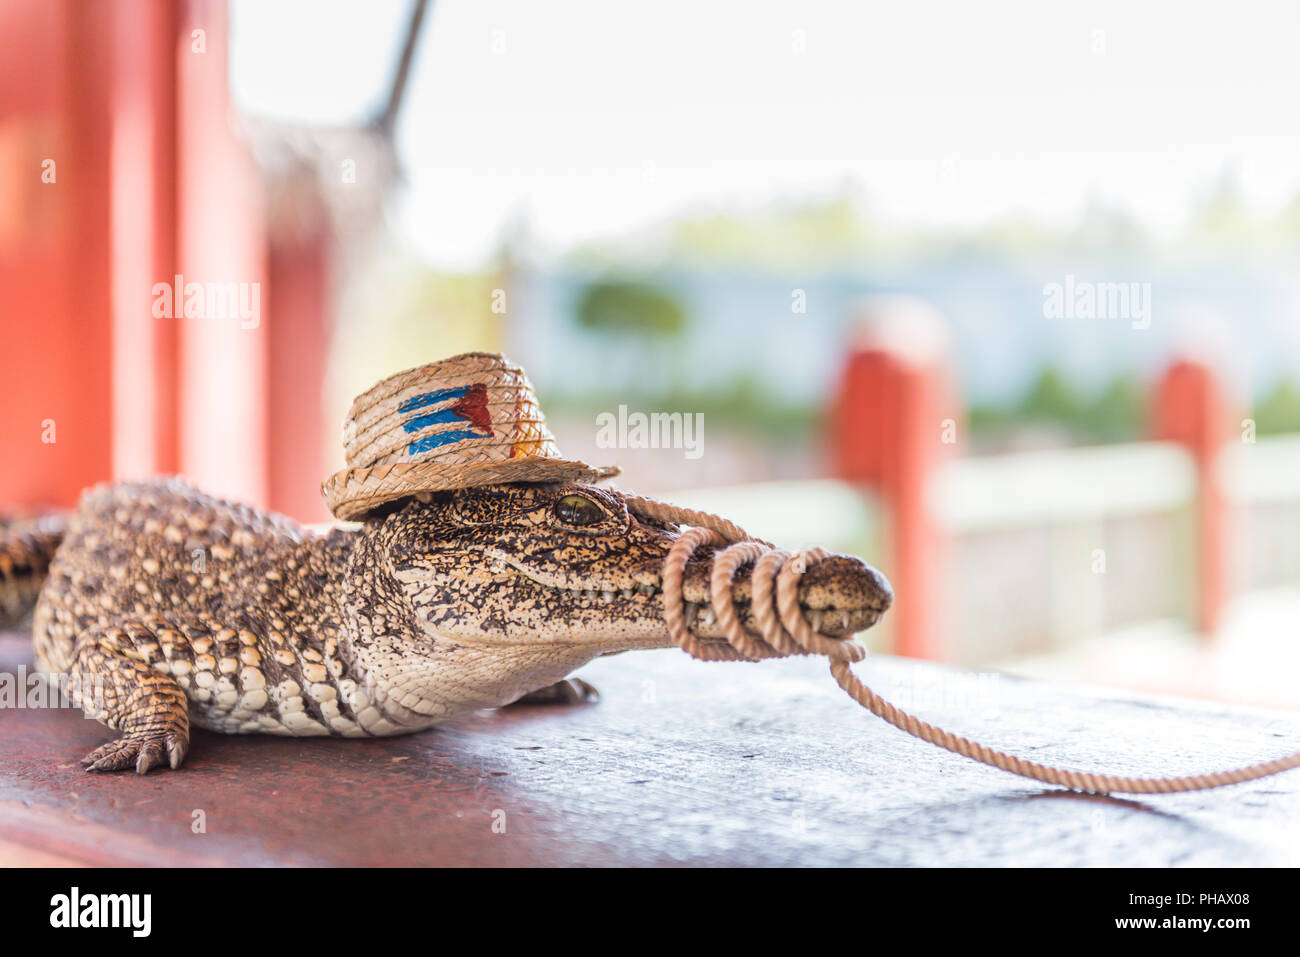 Formerly endangered Cuban crocodile successfully produced in breeding farm, now sold as stuffed souvenirs. Stock Photo